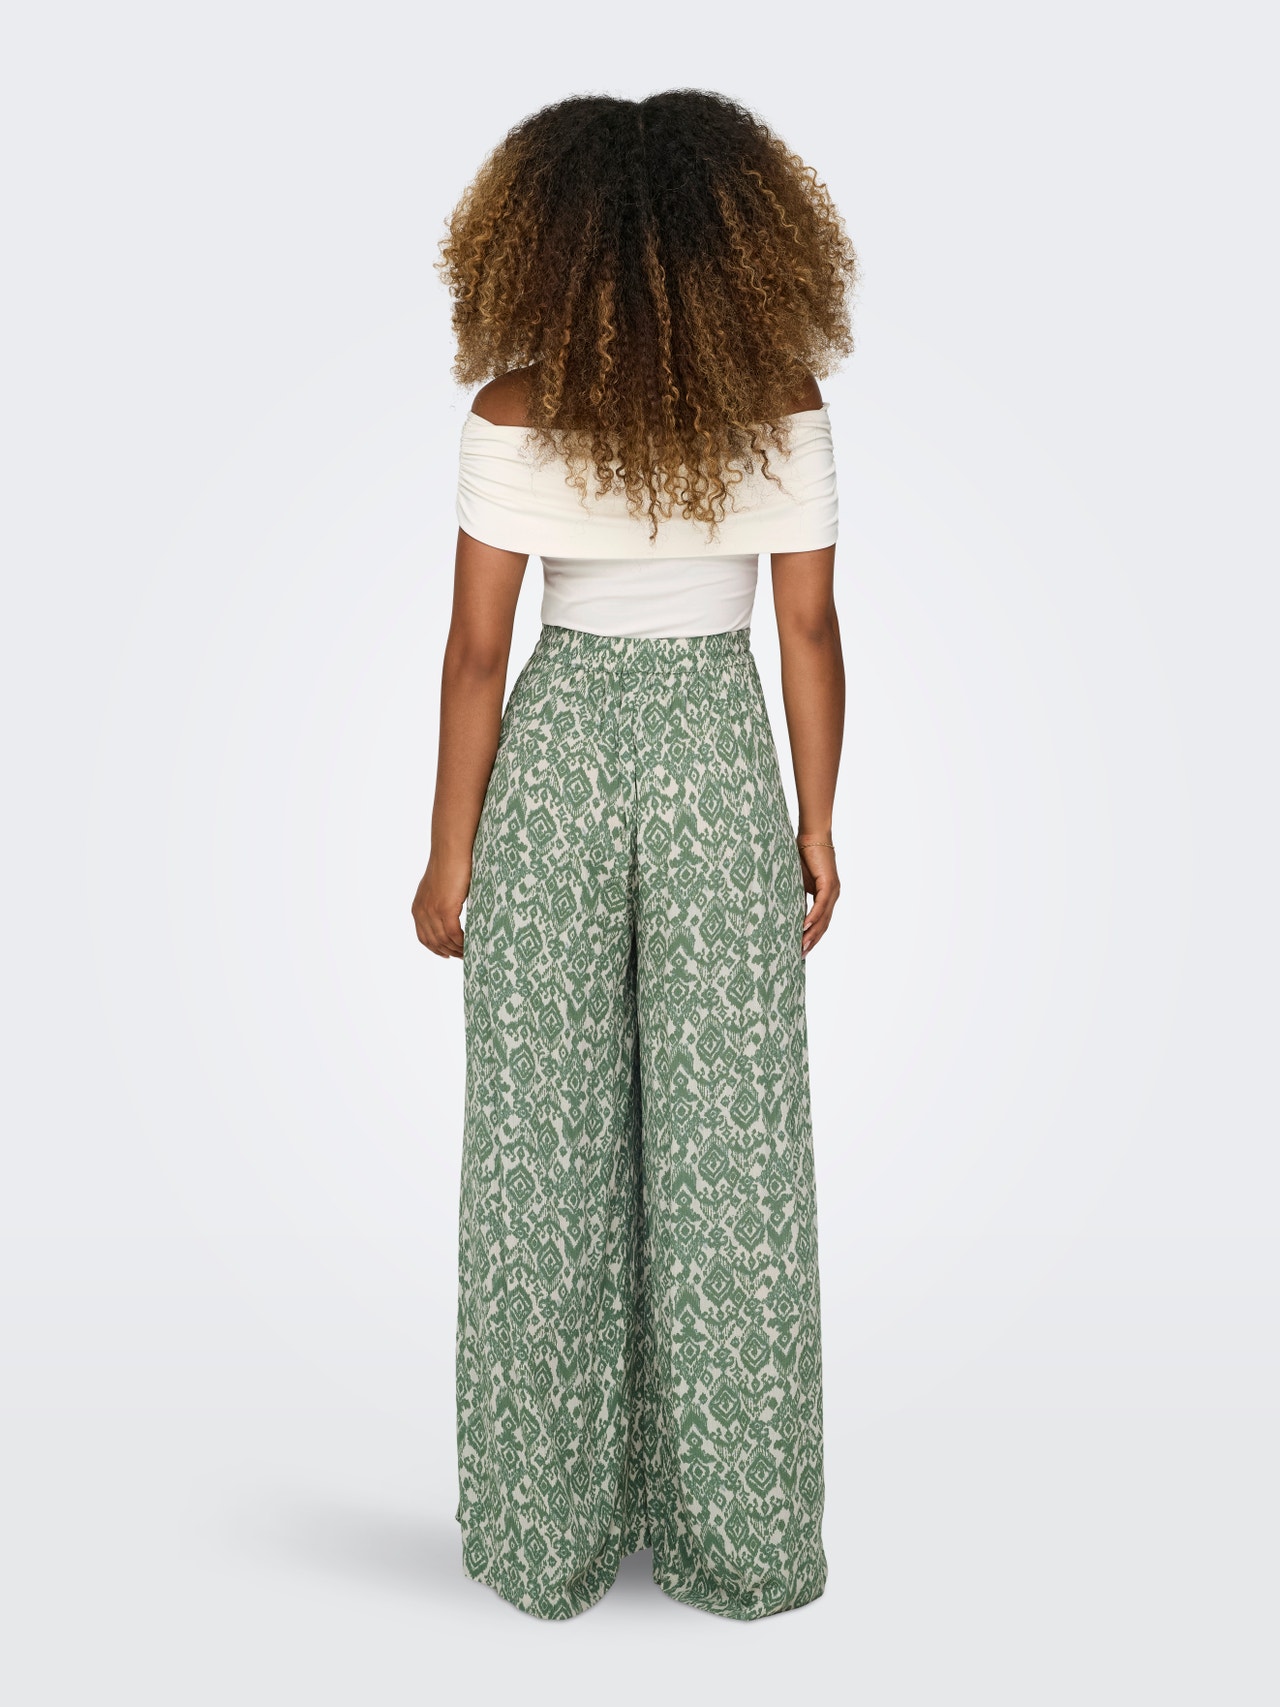 ONLY Wide fitted trousers -Hedge Green - 15338550